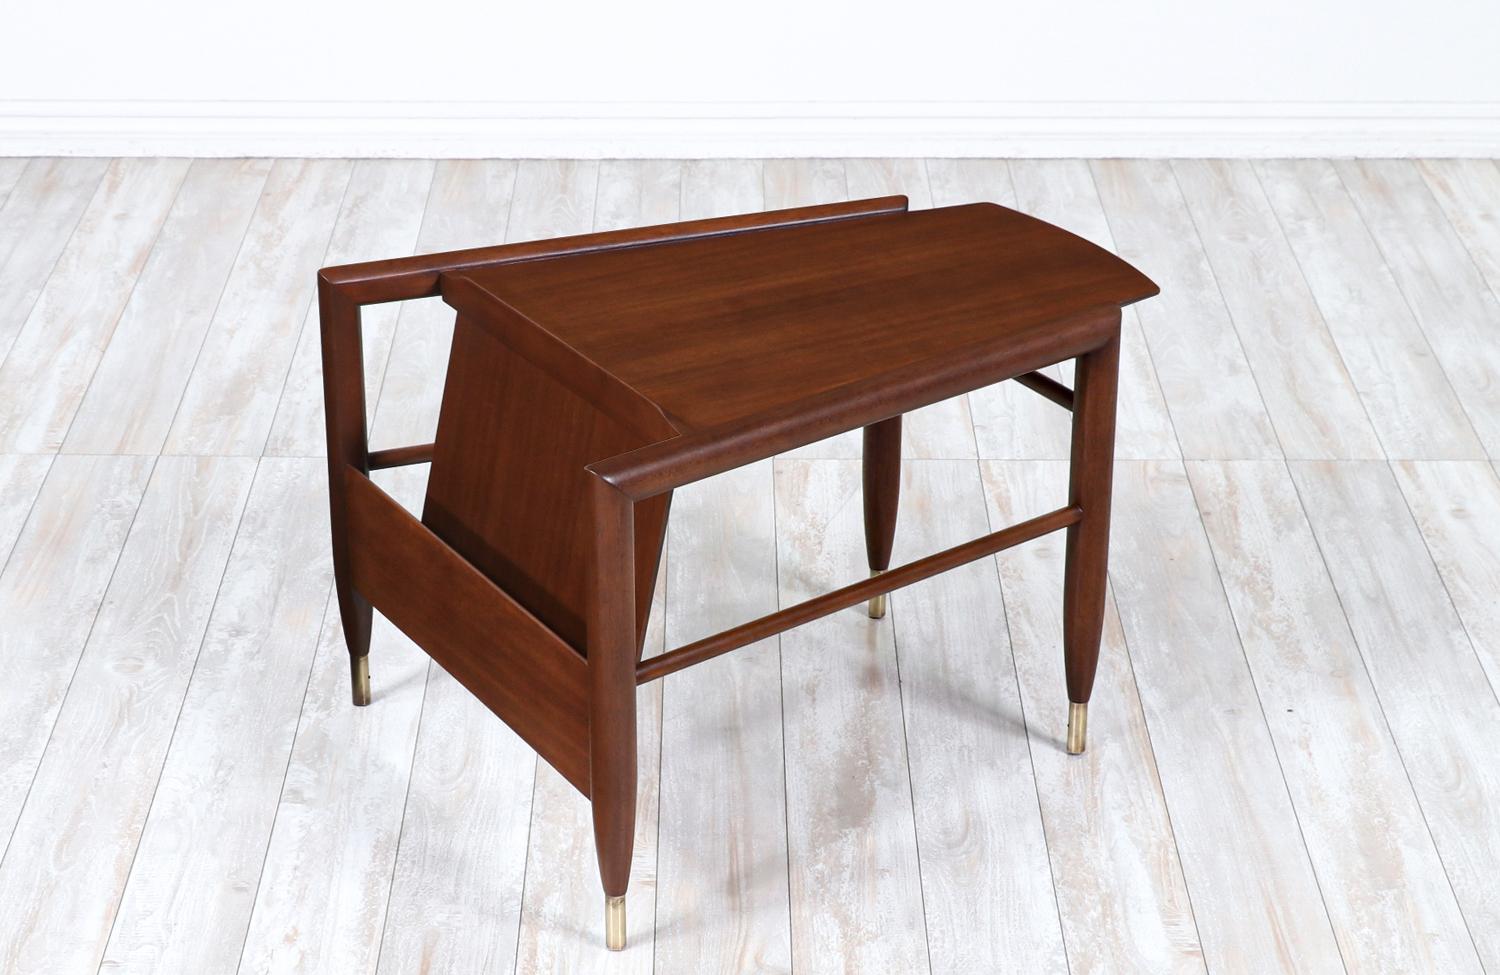 Stylish Mid-Century Modern side table designed by John Keal for Brown Saltman in the United States circa 1960s. This modern side table is crafted in sturdy walnut-stained mahogany with patinated brass sabots in all four legs. The top is complemented